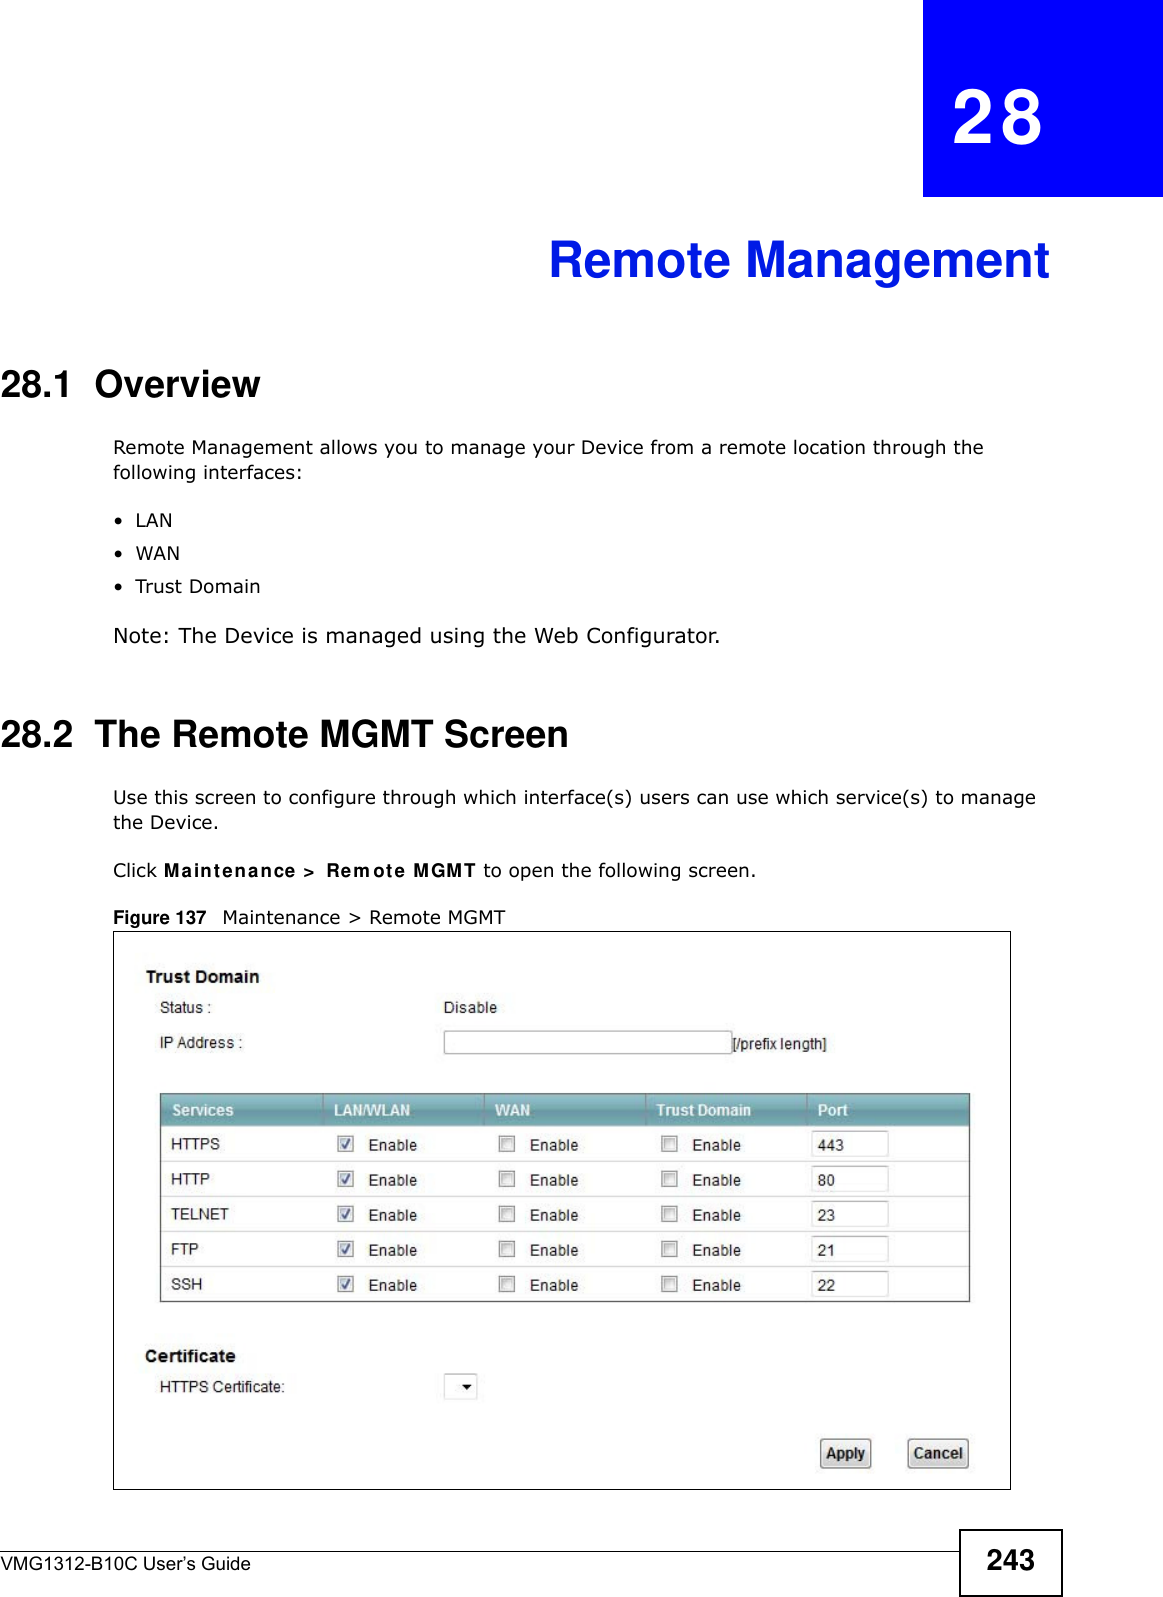 VMG1312-B10C User’s Guide 243CHAPTER   28Remote Management28.1  OverviewRemote Management allows you to manage your Device from a remote location through the following interfaces:•LAN•WAN•Trust DomainNote: The Device is managed using the Web Configurator.28.2  The Remote MGMT ScreenUse this screen to configure through which interface(s) users can use which service(s) to manage the Device.Click M a in t e n a nce &gt;  Rem ot e M GMT to open the following screen. Figure 137   Maintenance &gt; Remote MGMT 